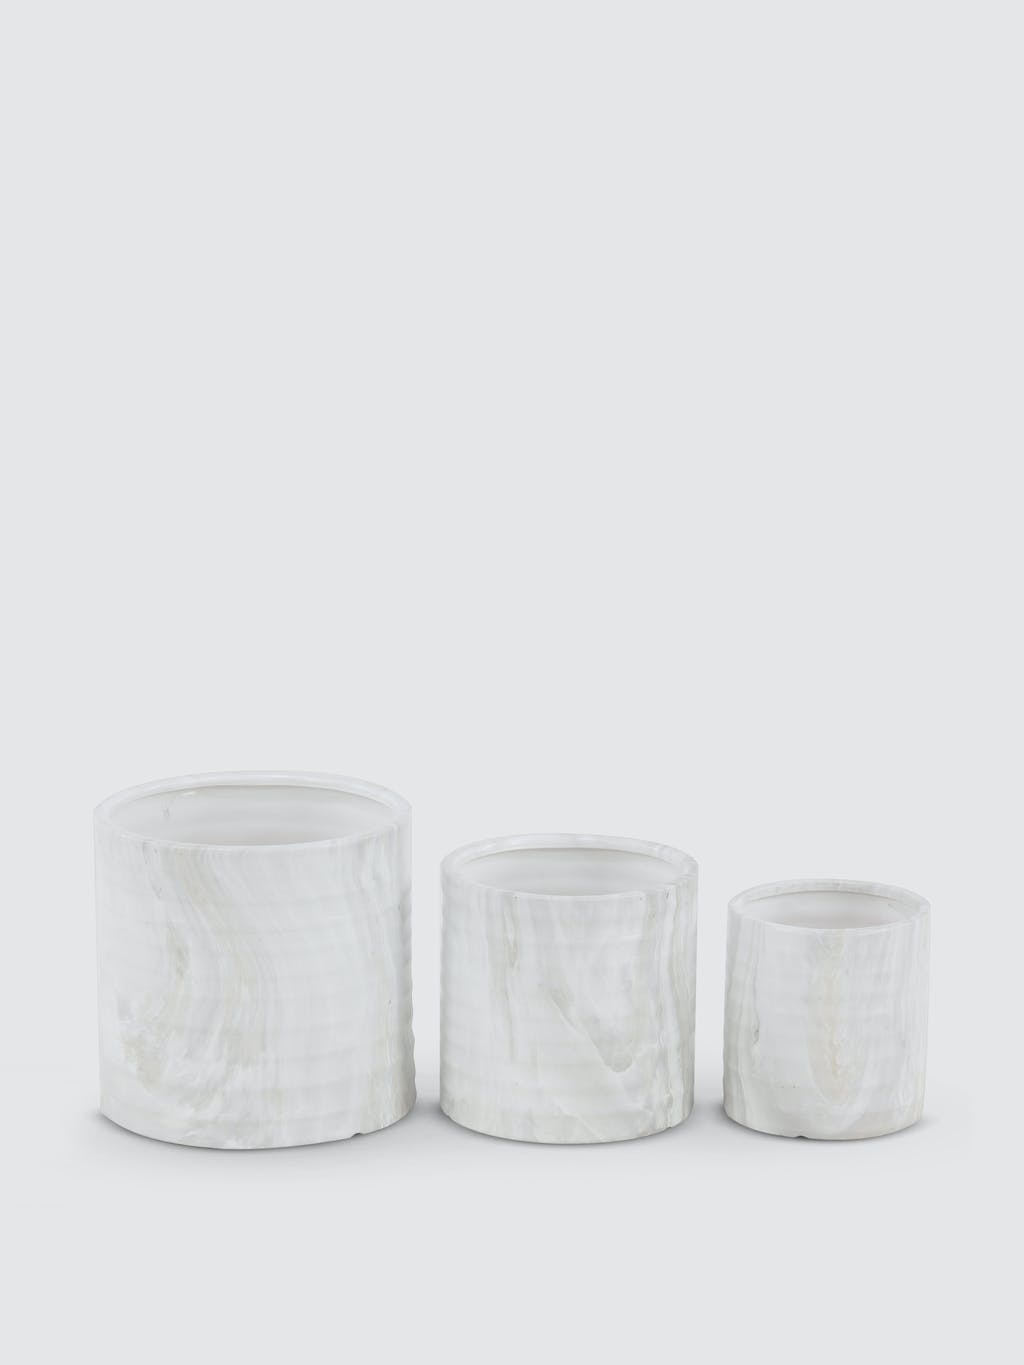 Marble Cylindrical Ceramic Planters, Set Of 3